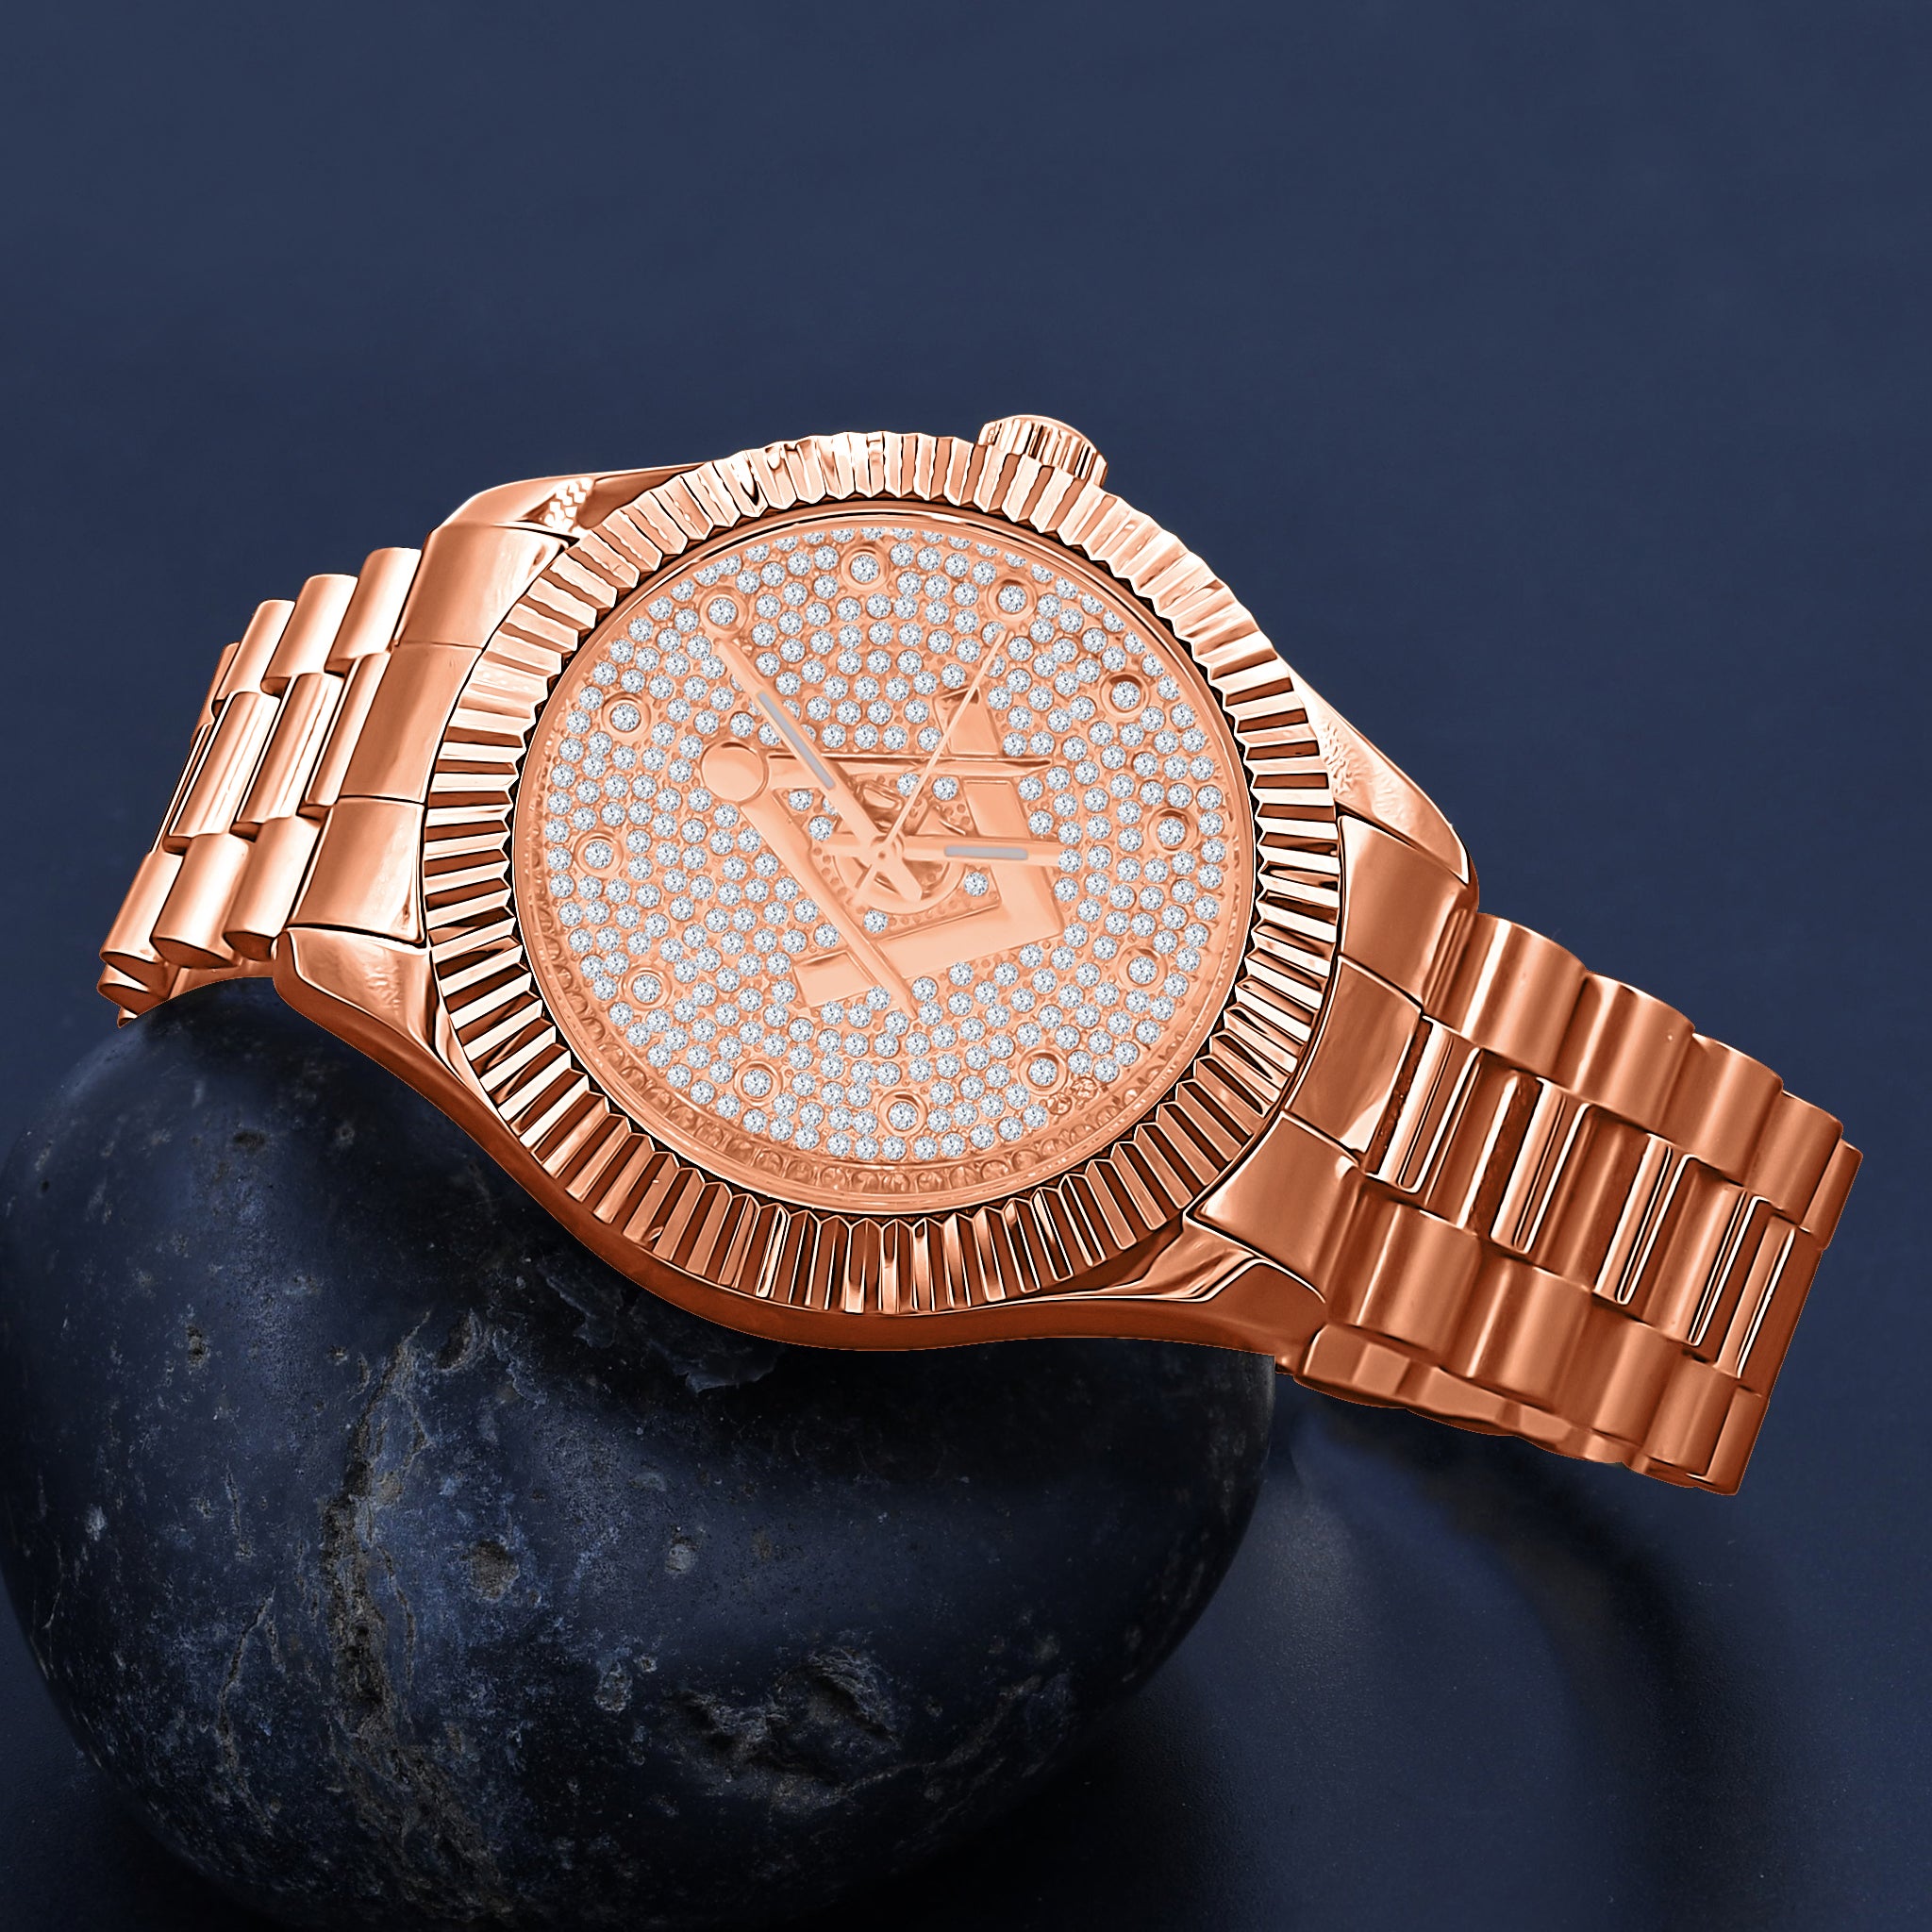 ARIES MASONIC ICED OUT HIP HOP METAL WATCH | 562995